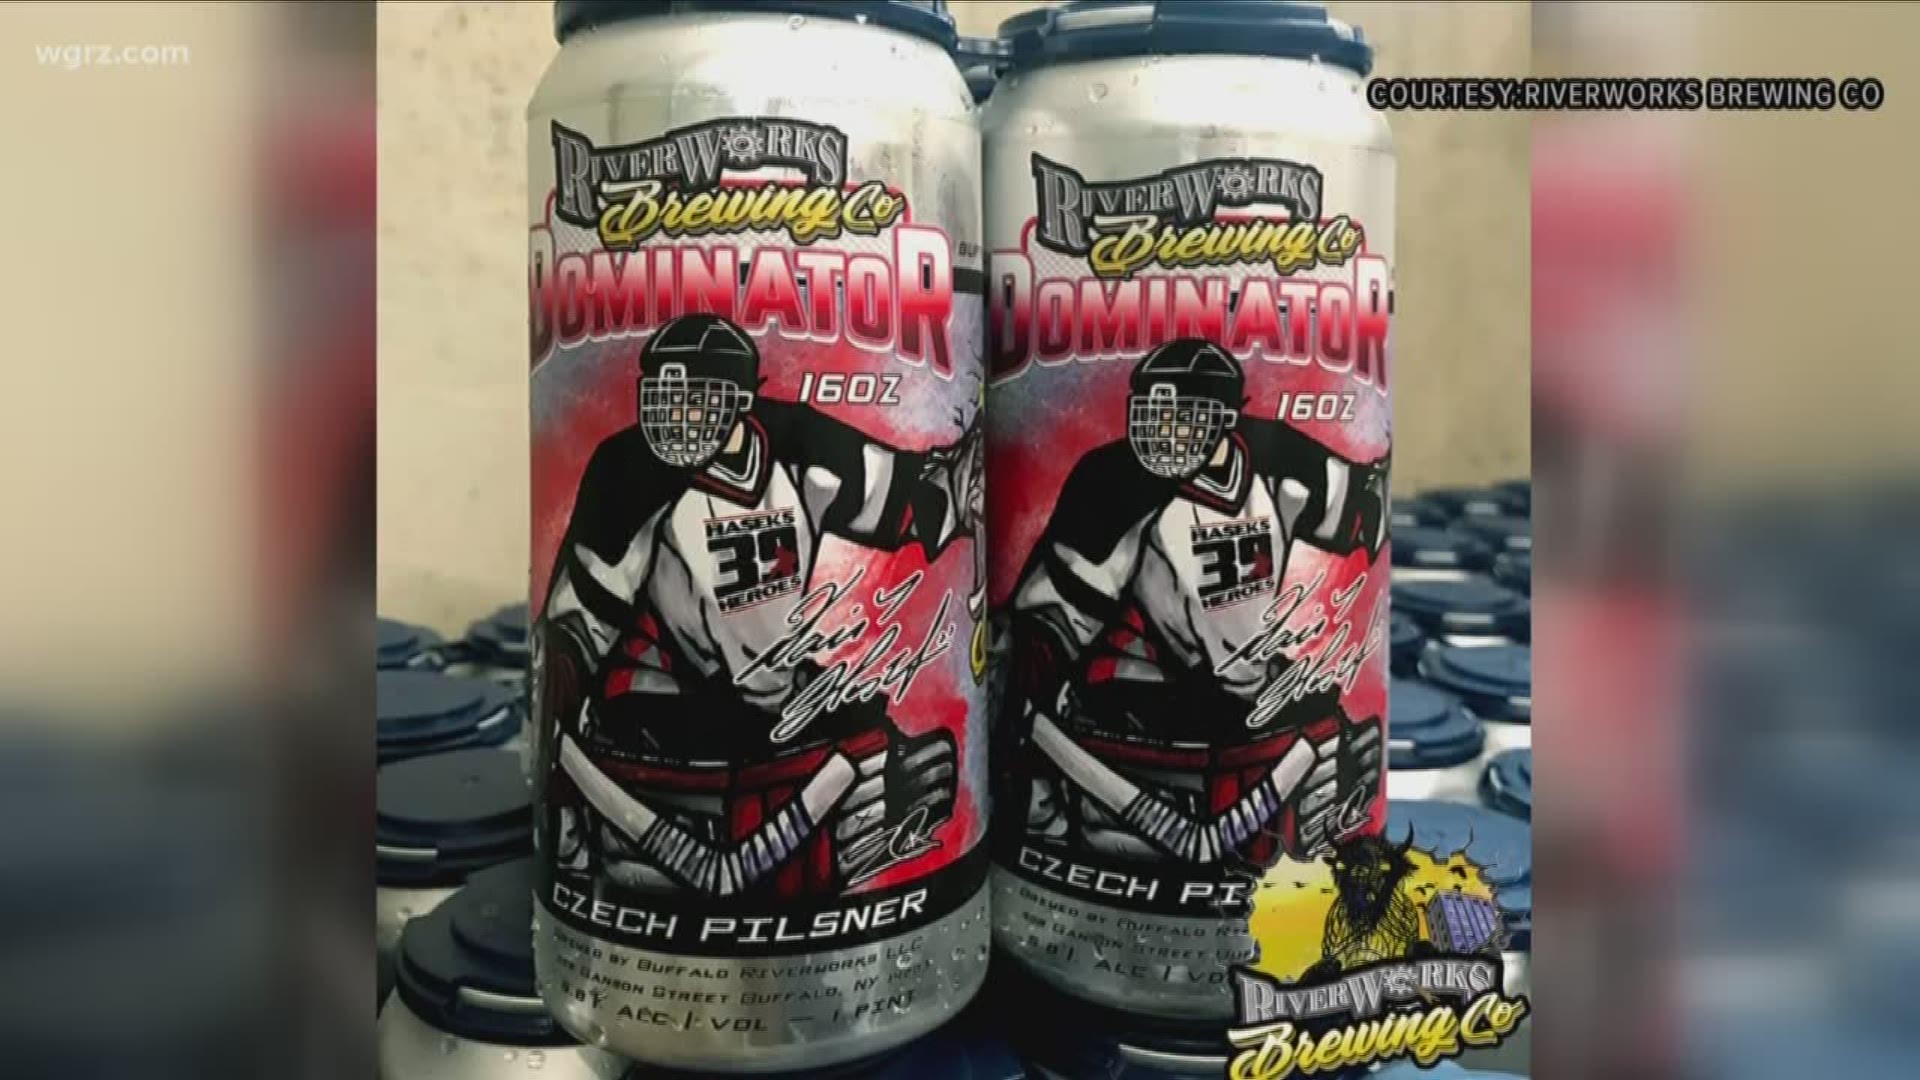 It's the brewery's first canned beer...